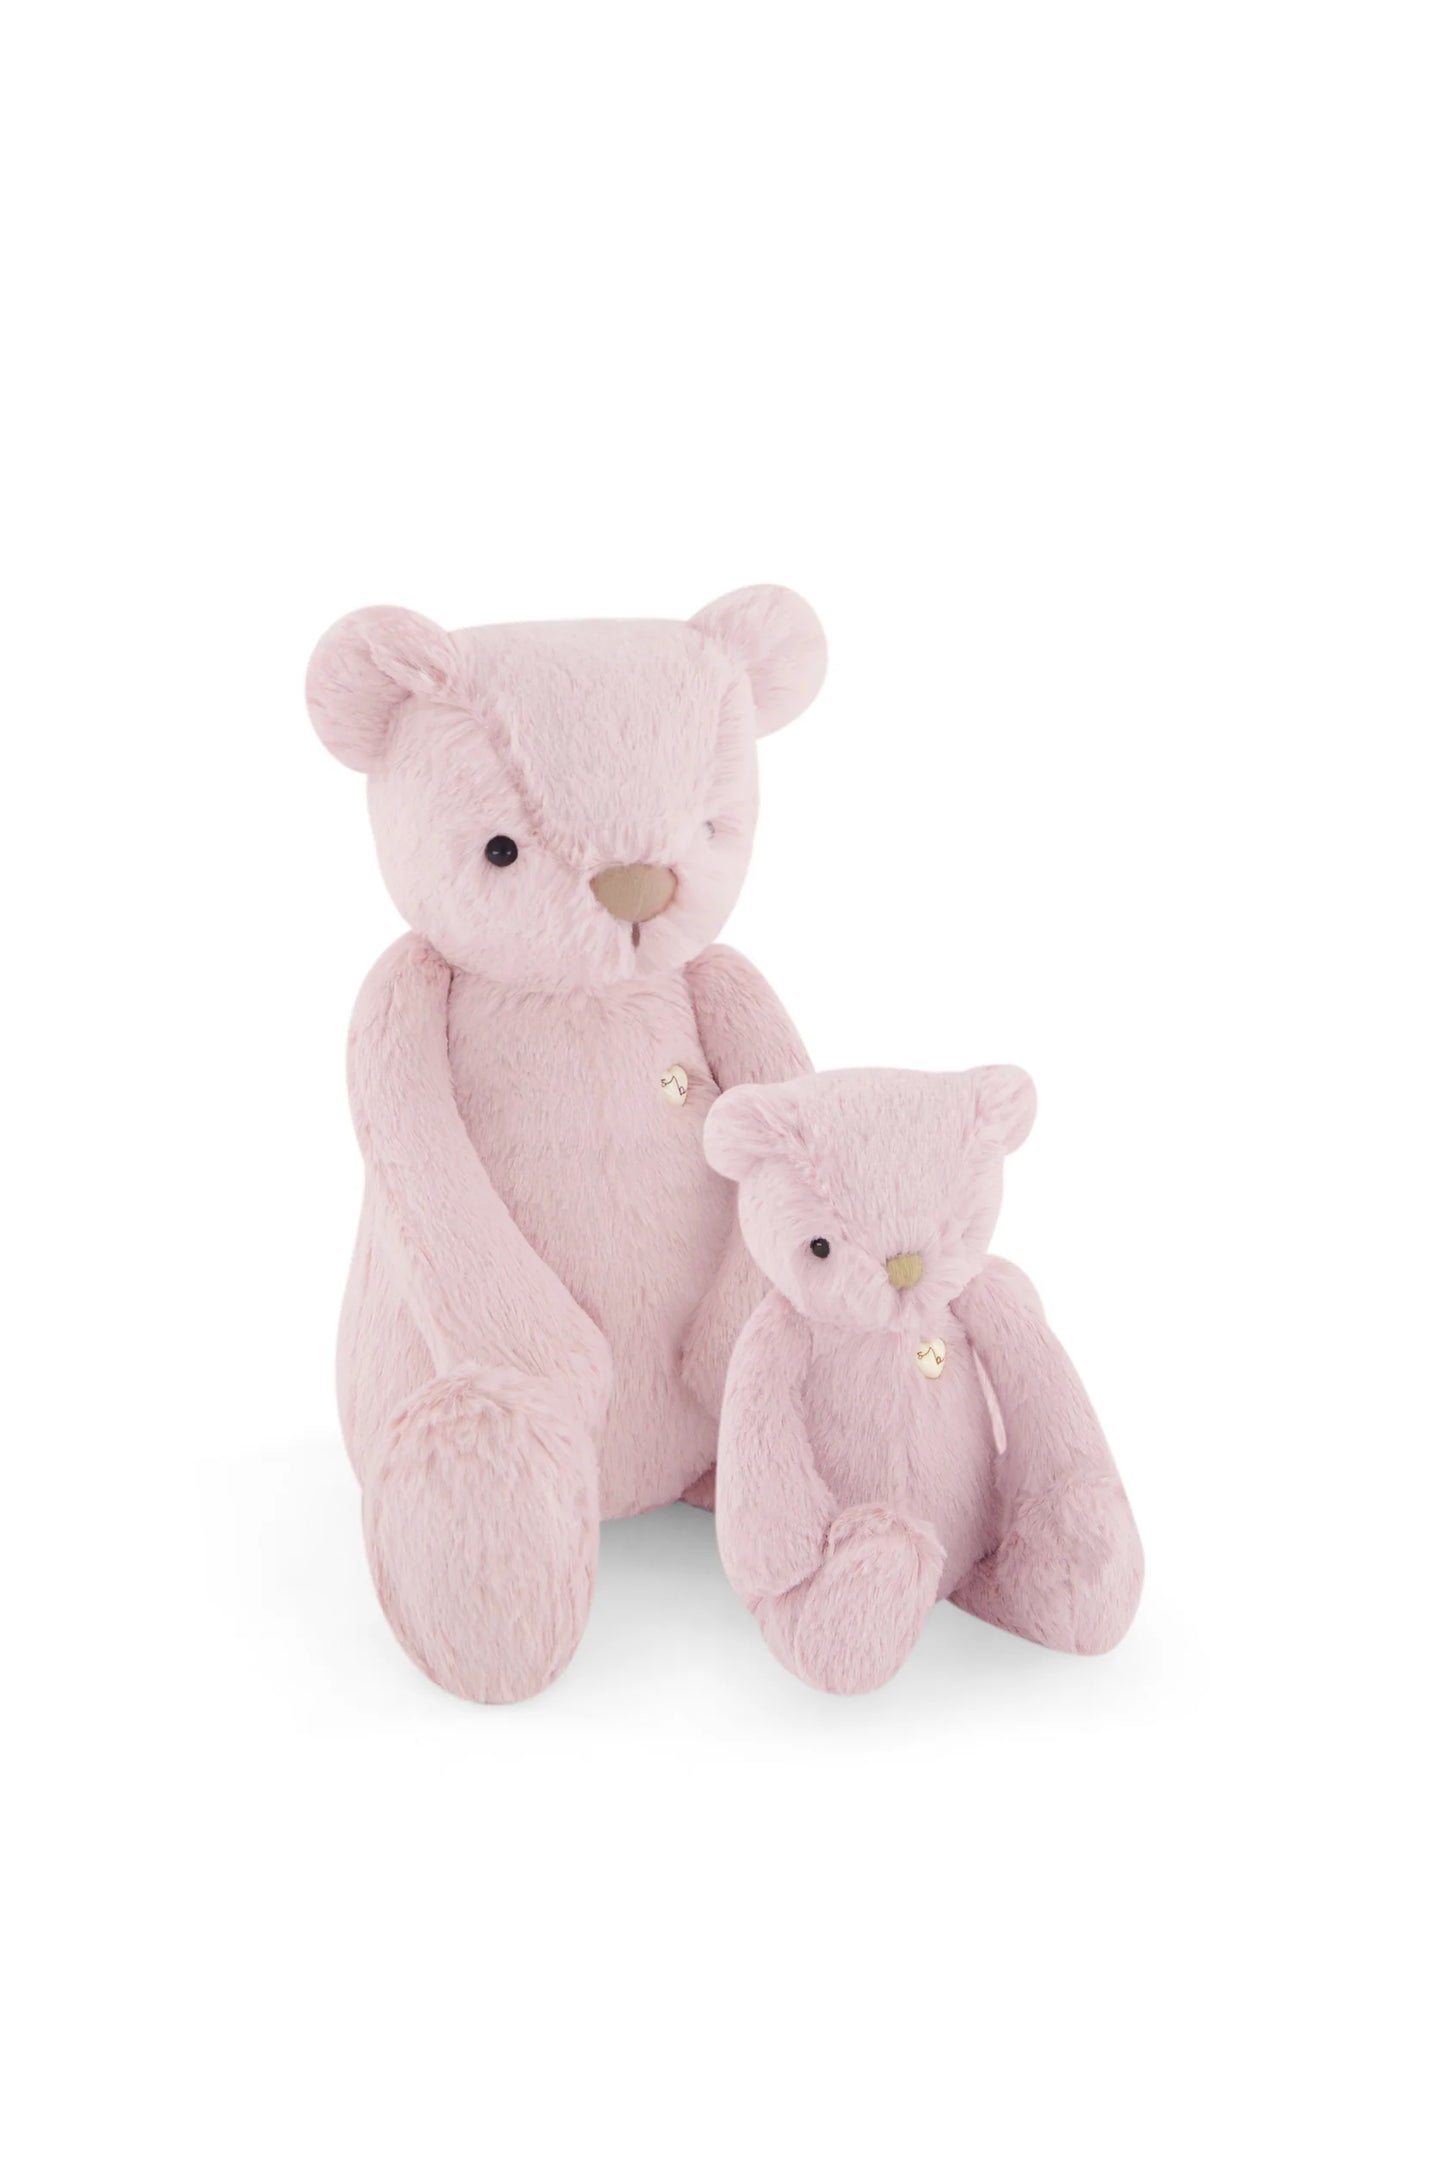 Jamie Kay Snuggle Bunnies - George the Bear (Powder Pink - Size Options Available)